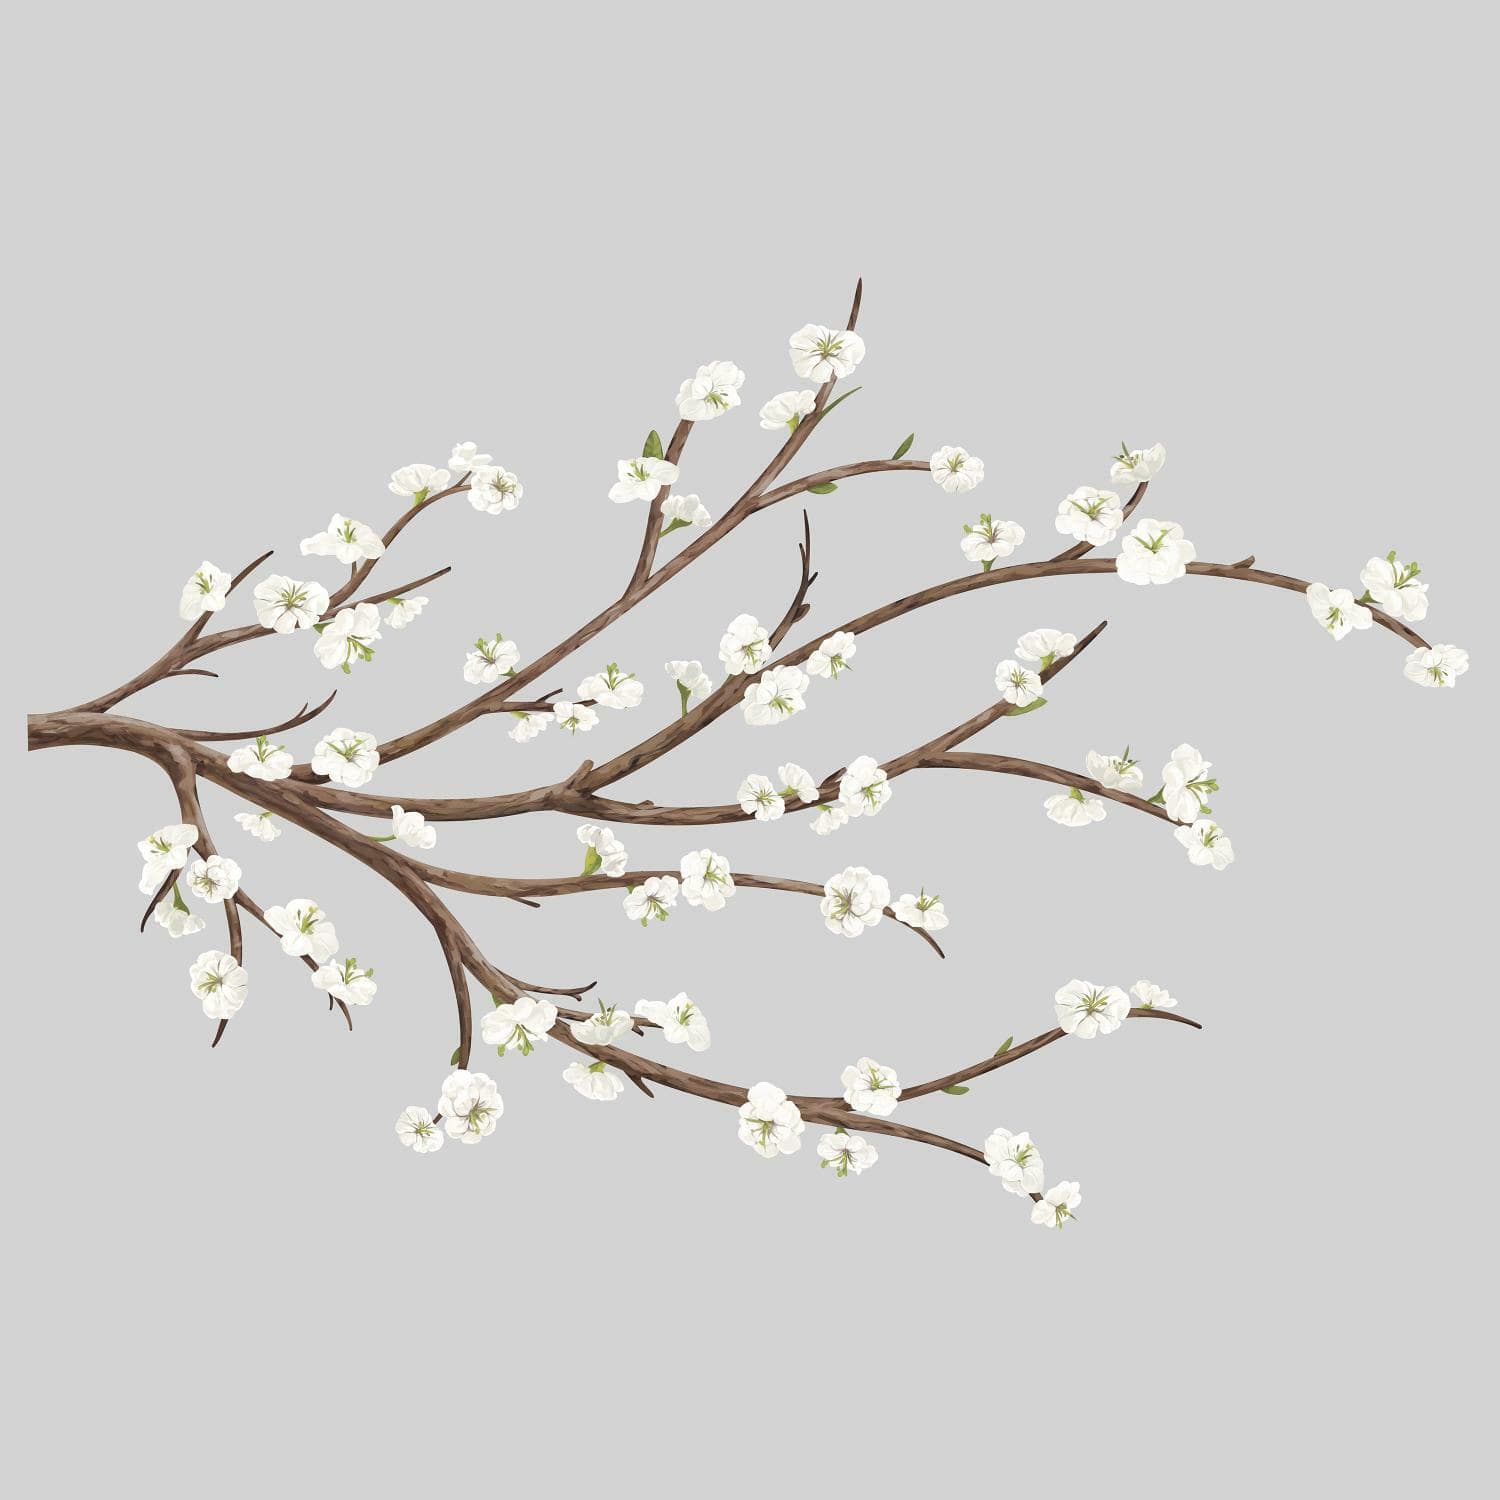 RoomMates White Blossom Branch Giant Decals